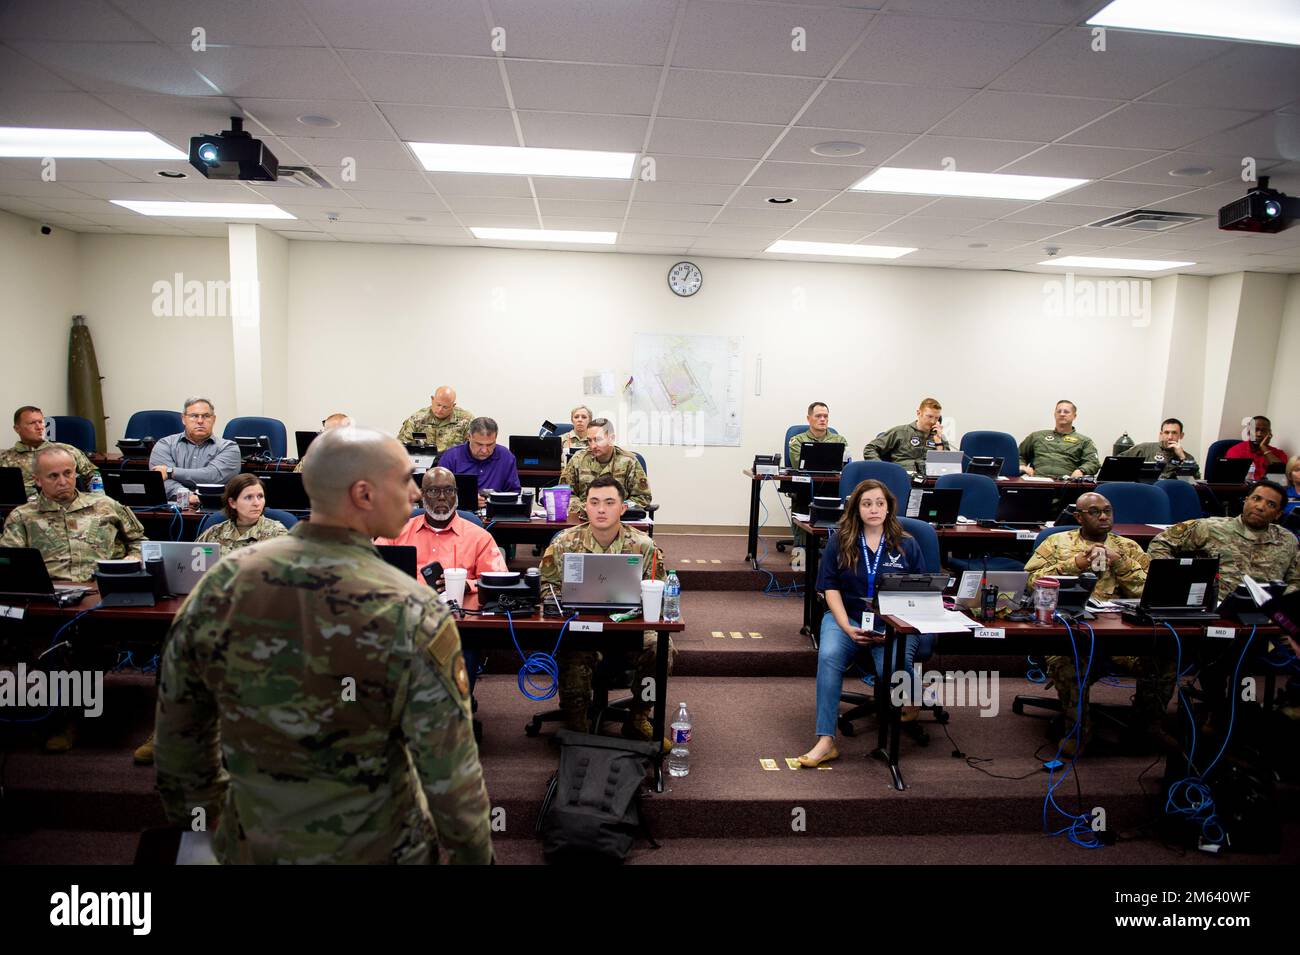 U.S. Lt. Col. Clemente Berrios (left front), Emergency Operations Center director and 902nd Civil Engineer Squadron commander, addresses staff of the Crisis Action Team during a Major Accident Response Exercise, Mar. 30, 2022, at Joint Base San Antonio-Randolph, Texas. MAREs demonstrate JBSA’s Disaster Response Forces ability to assess and respond to an aircraft mishap. The 502nd Air Base Wing worked alongside the Schertz Fire Department, 12th Flying Training Wing and the 59th Medical Wing validate the necessary support during a simulated accident. Stock Photo